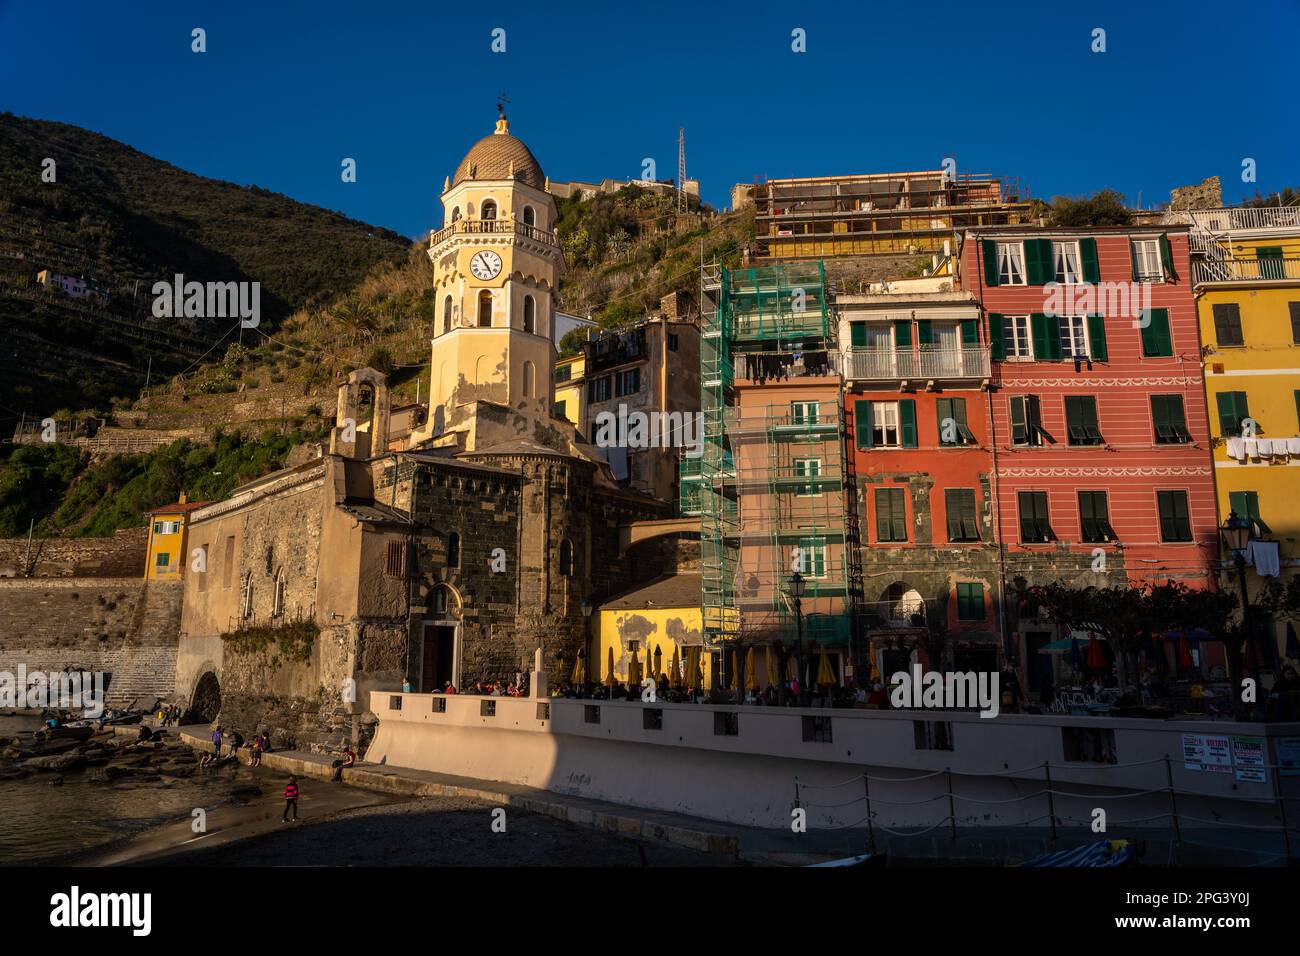 Vernazza. Cinque Terre on the Italian Riveria is a favorite for tourists to Italy and for Instagram photographs. Stock Photo